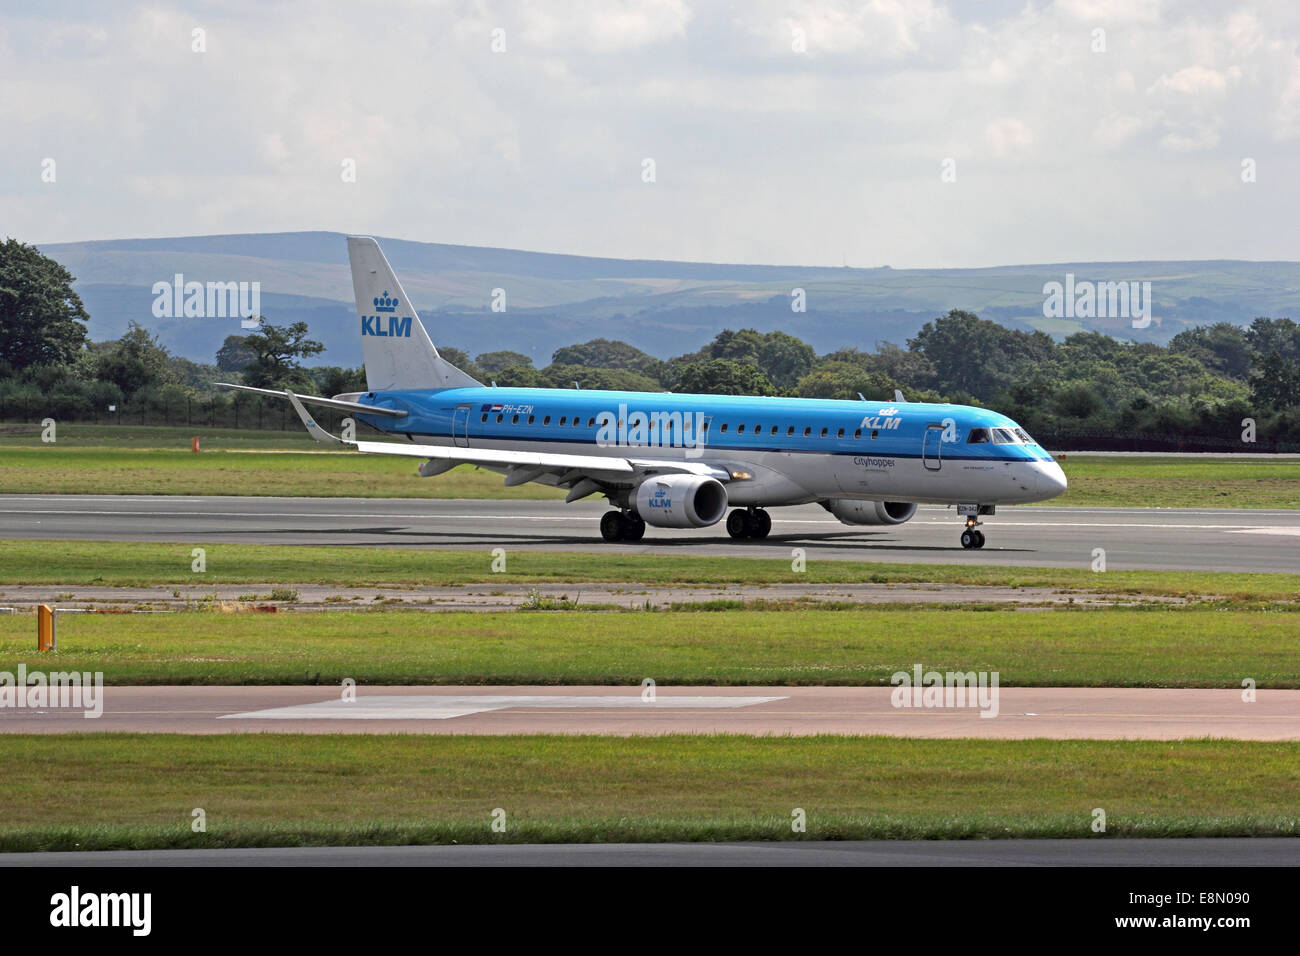 KLM Cityhopper Embraer ERJ-190 aeroplane taxiing at Manchester Airport Stock Photo